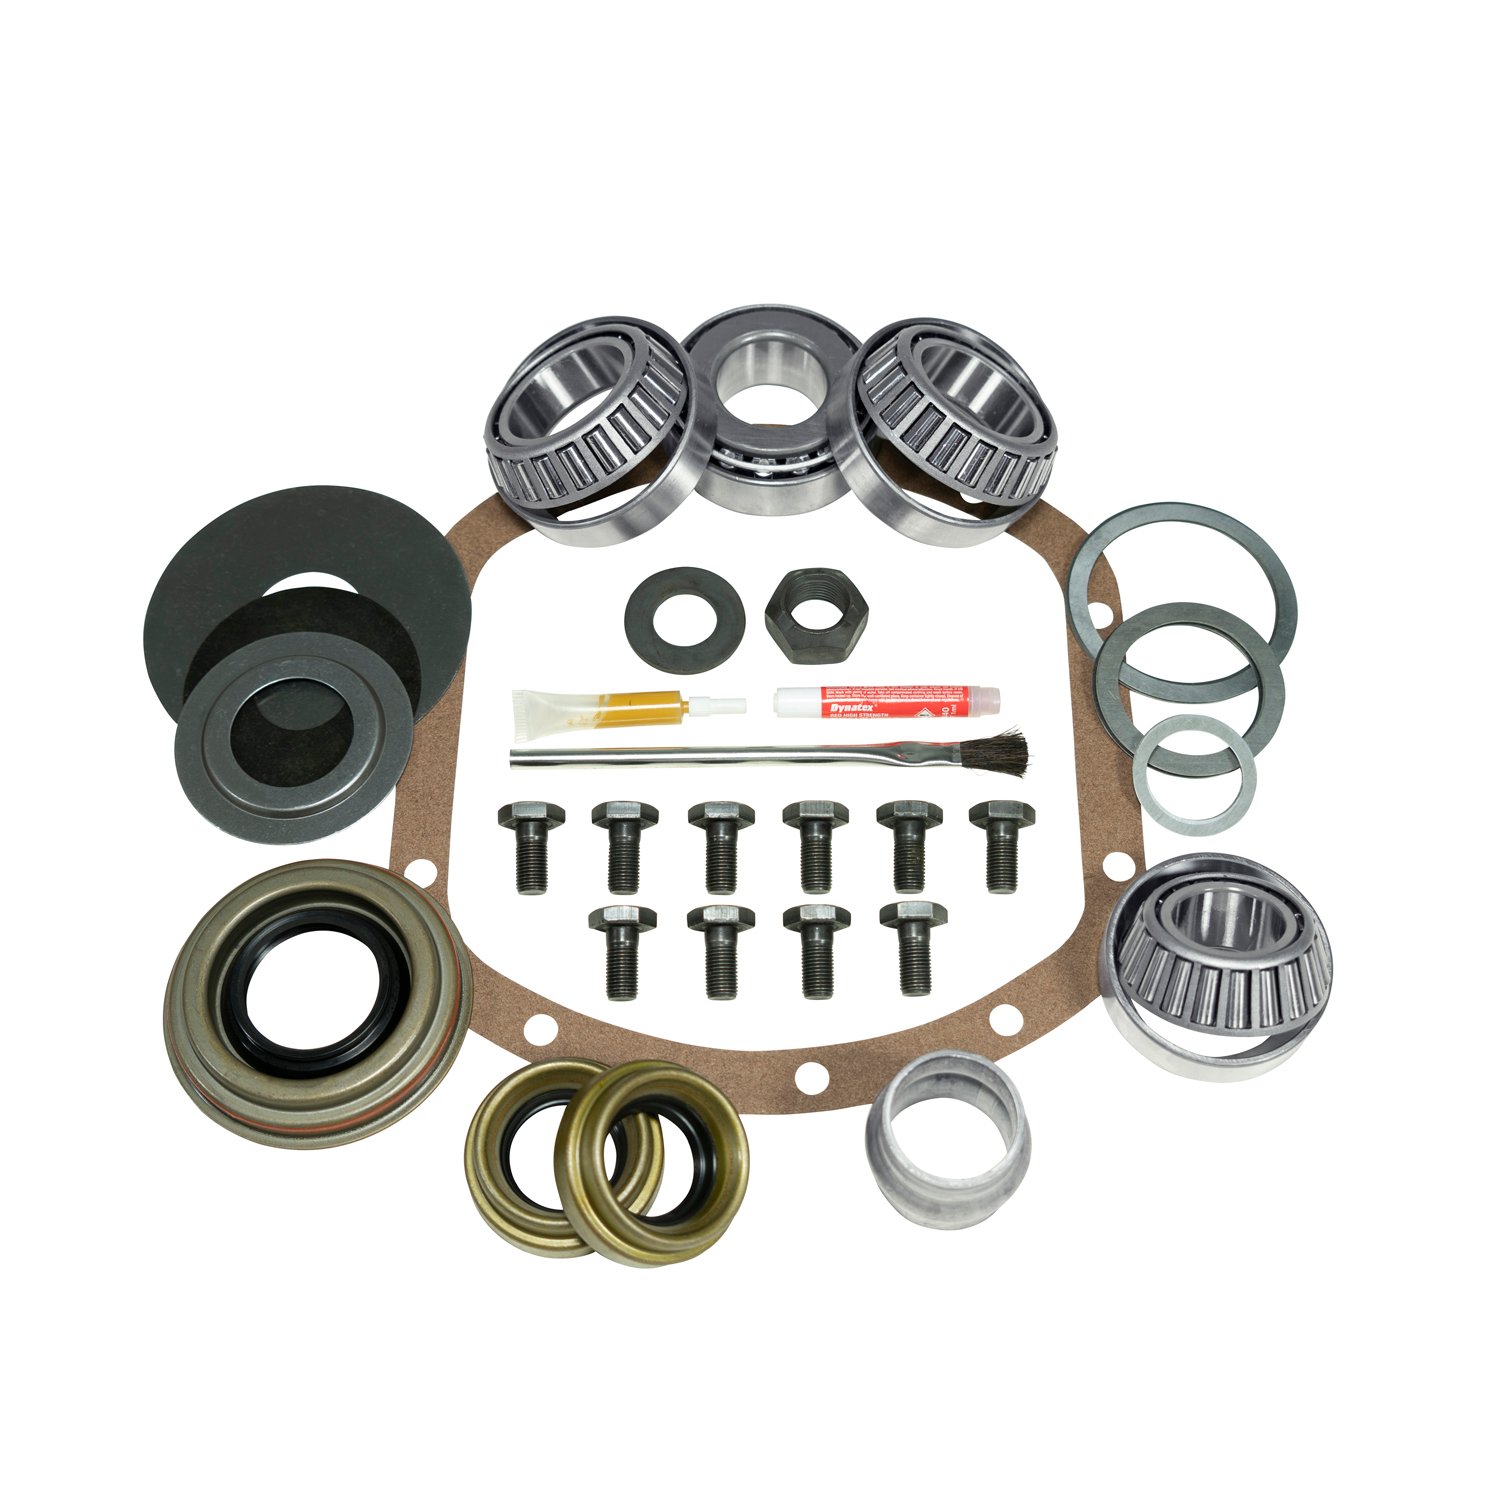 USA Standard 37130 Master Overhaul Kit Rear Differential,